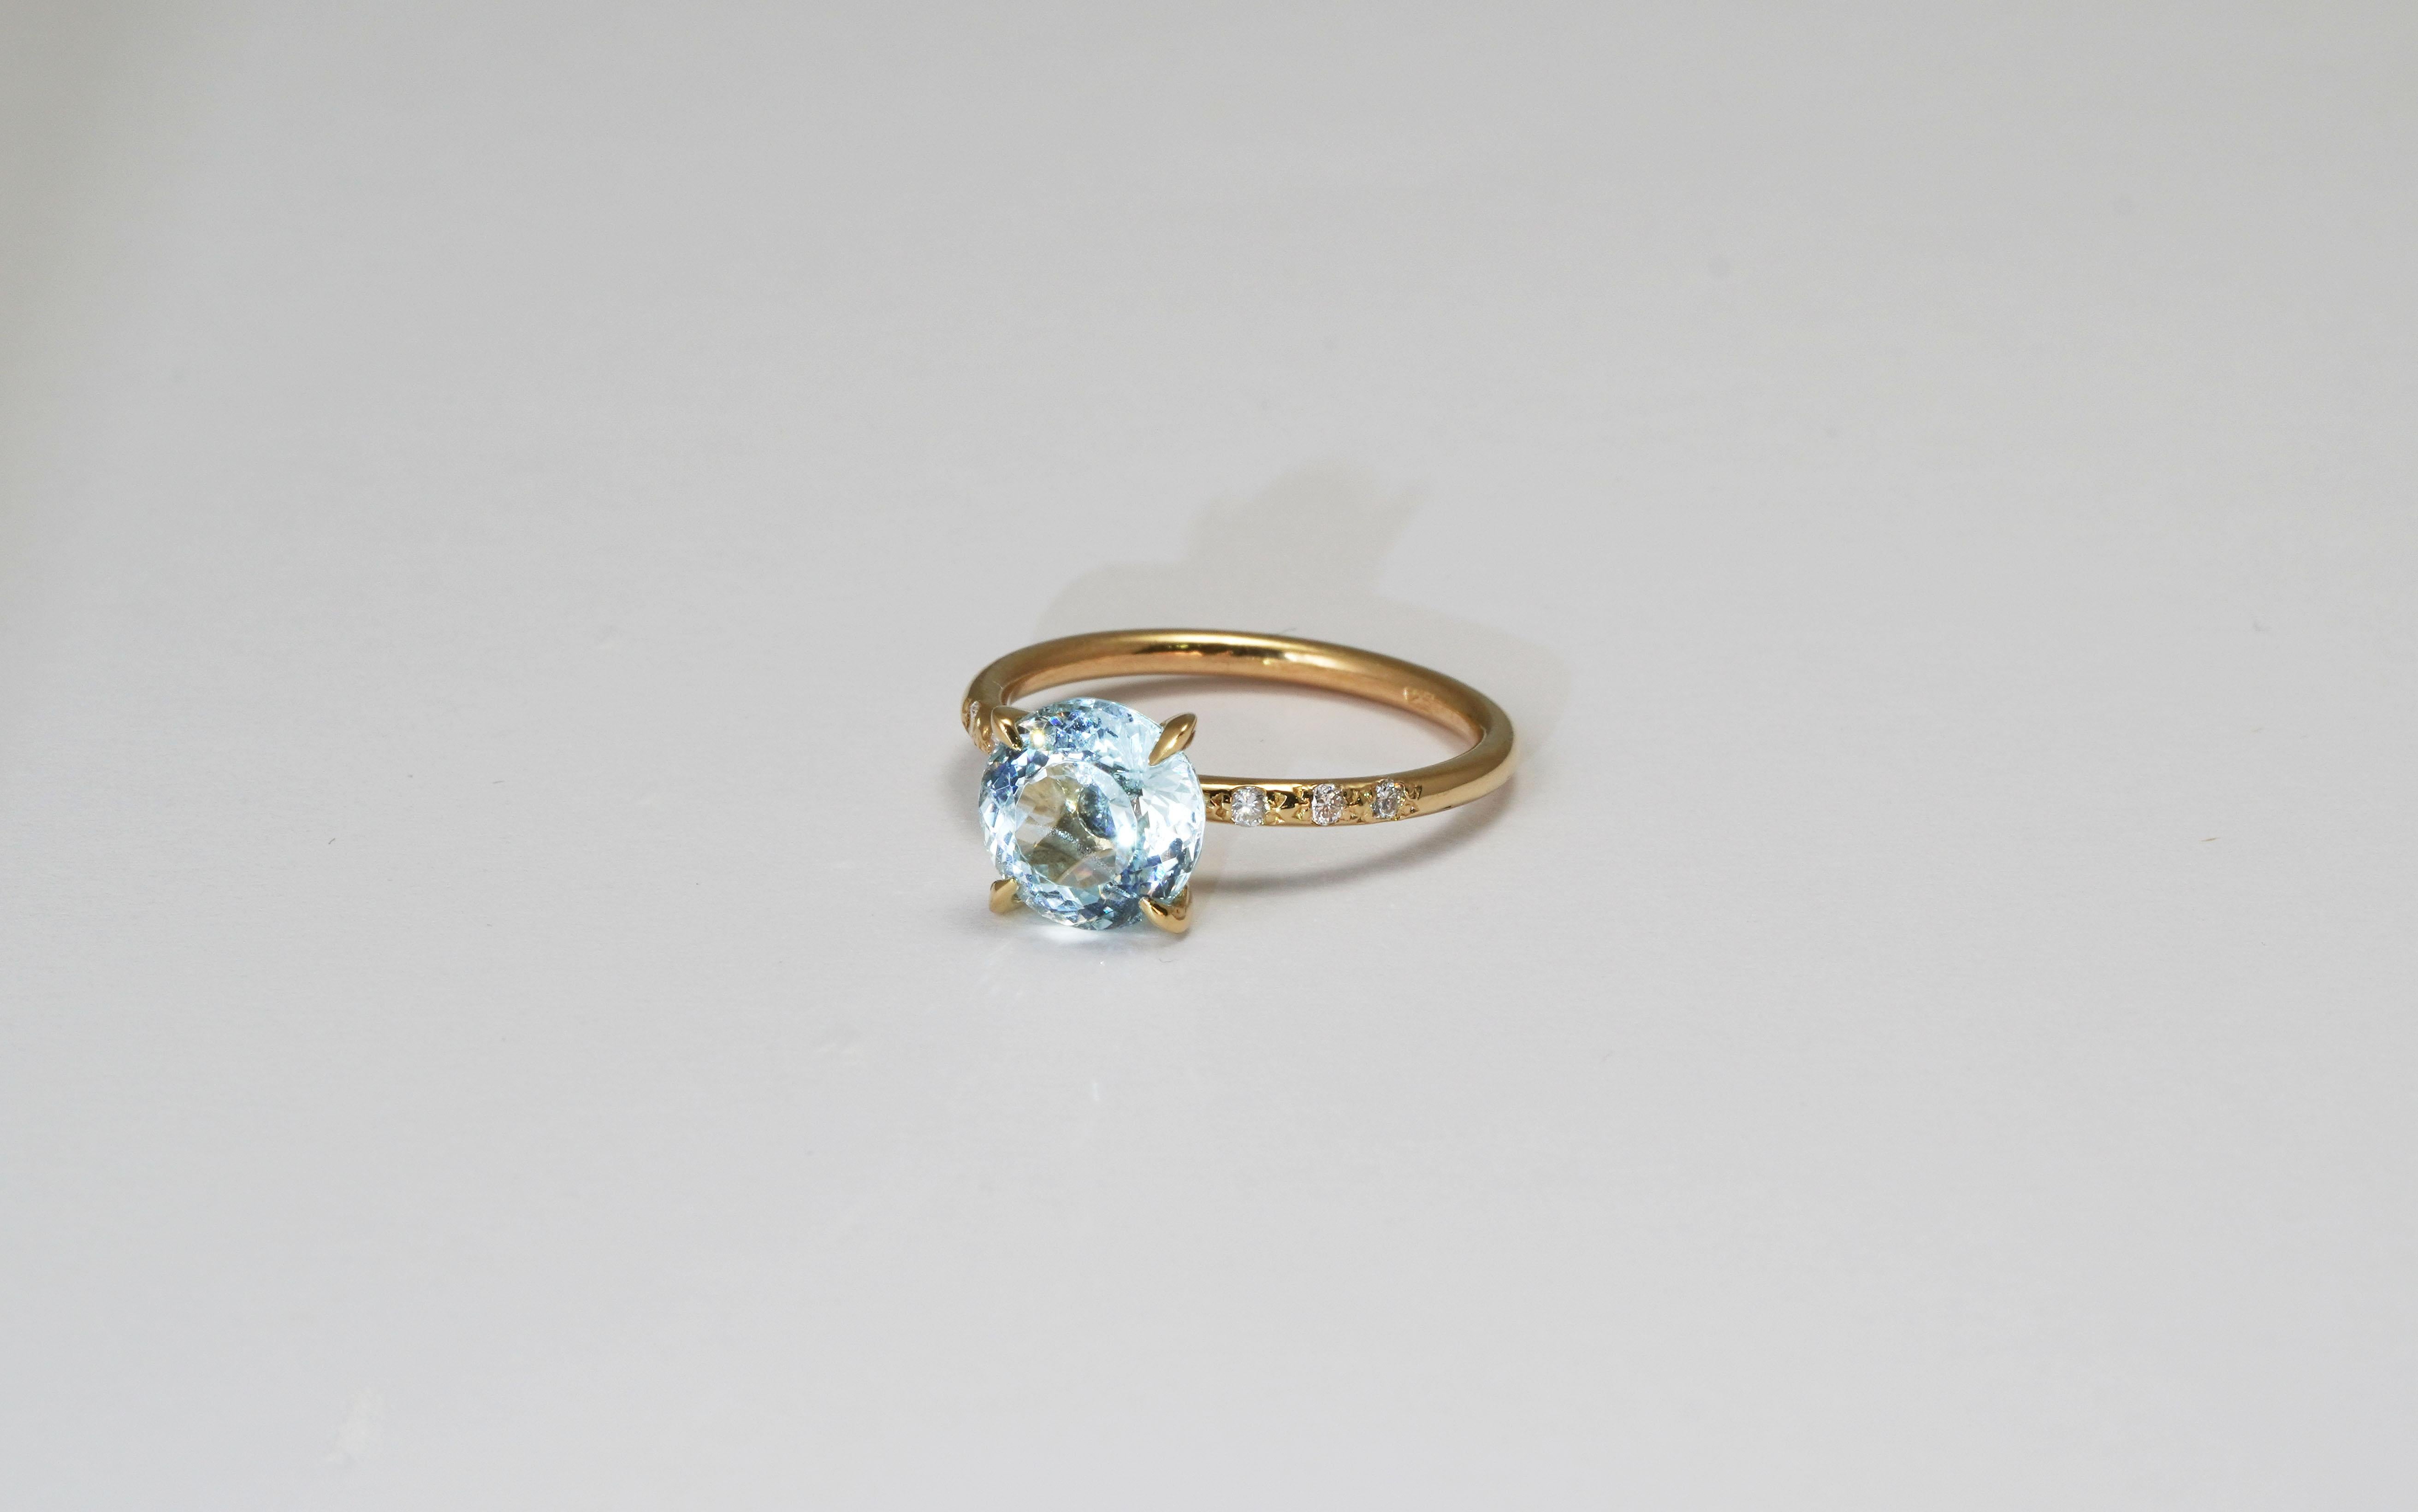 14 kt Gold ring with Aquamarine and Diamonds
Gold color: Yellow
Ring size: 5 US
Total weight: 1.97 grams

Set with:
- Aquamarine
Cut: Round 
Weight: 1.74 ct
Color: Blue

- 6 diamonds of total: 0.06 ct
Cut: Brilliant